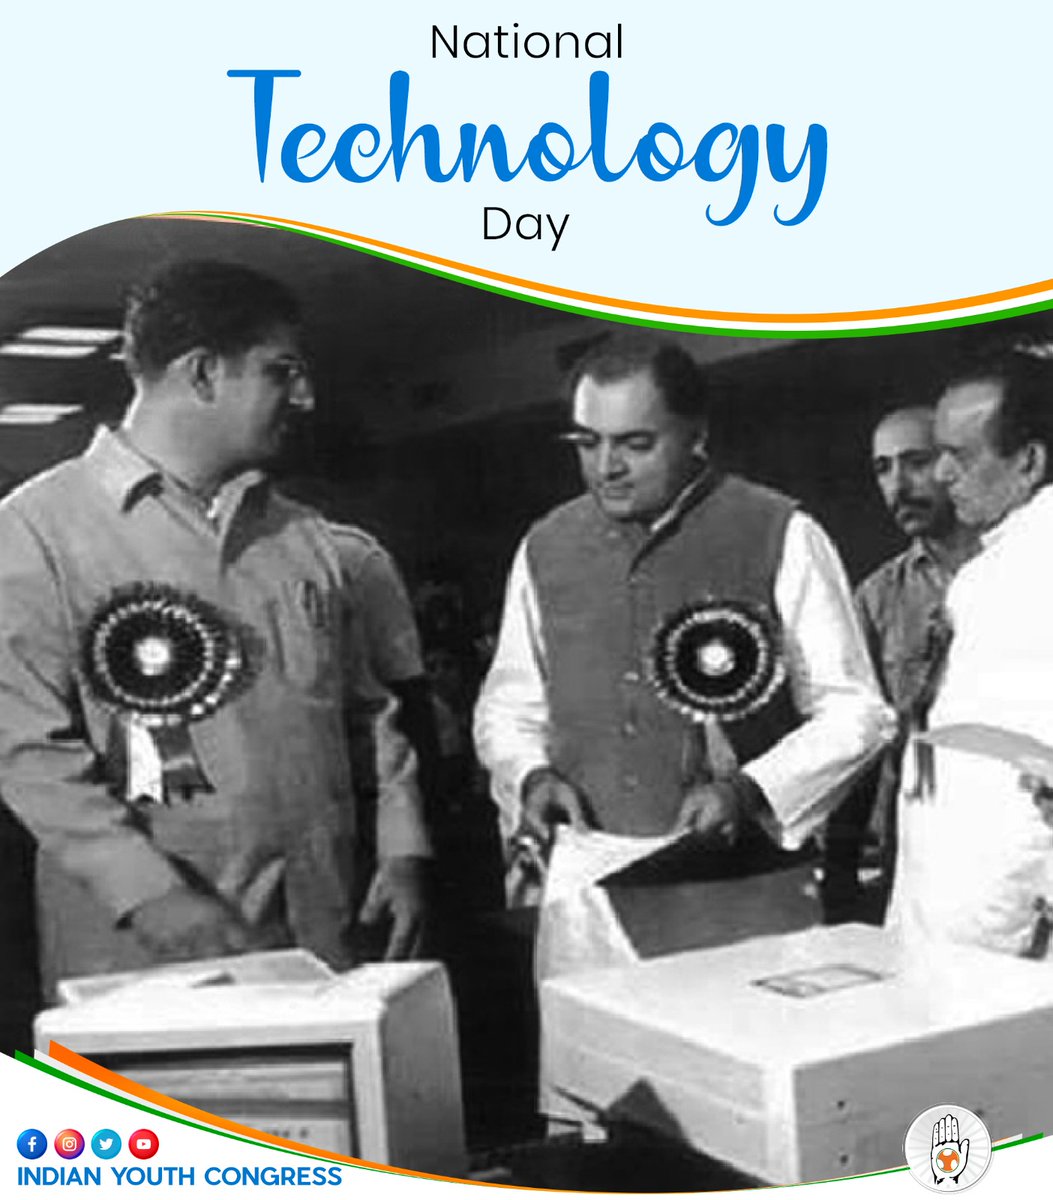 #NationalTechnologyDayTechnology is a powerful tool. And the amalgamation of technology, knowledge and intelligence stands the power to change the world. Navneet wishes you a Happy National Technology Day.

#NationalTechnologyDay #TechnologyDay2023 
#NavneetEducation